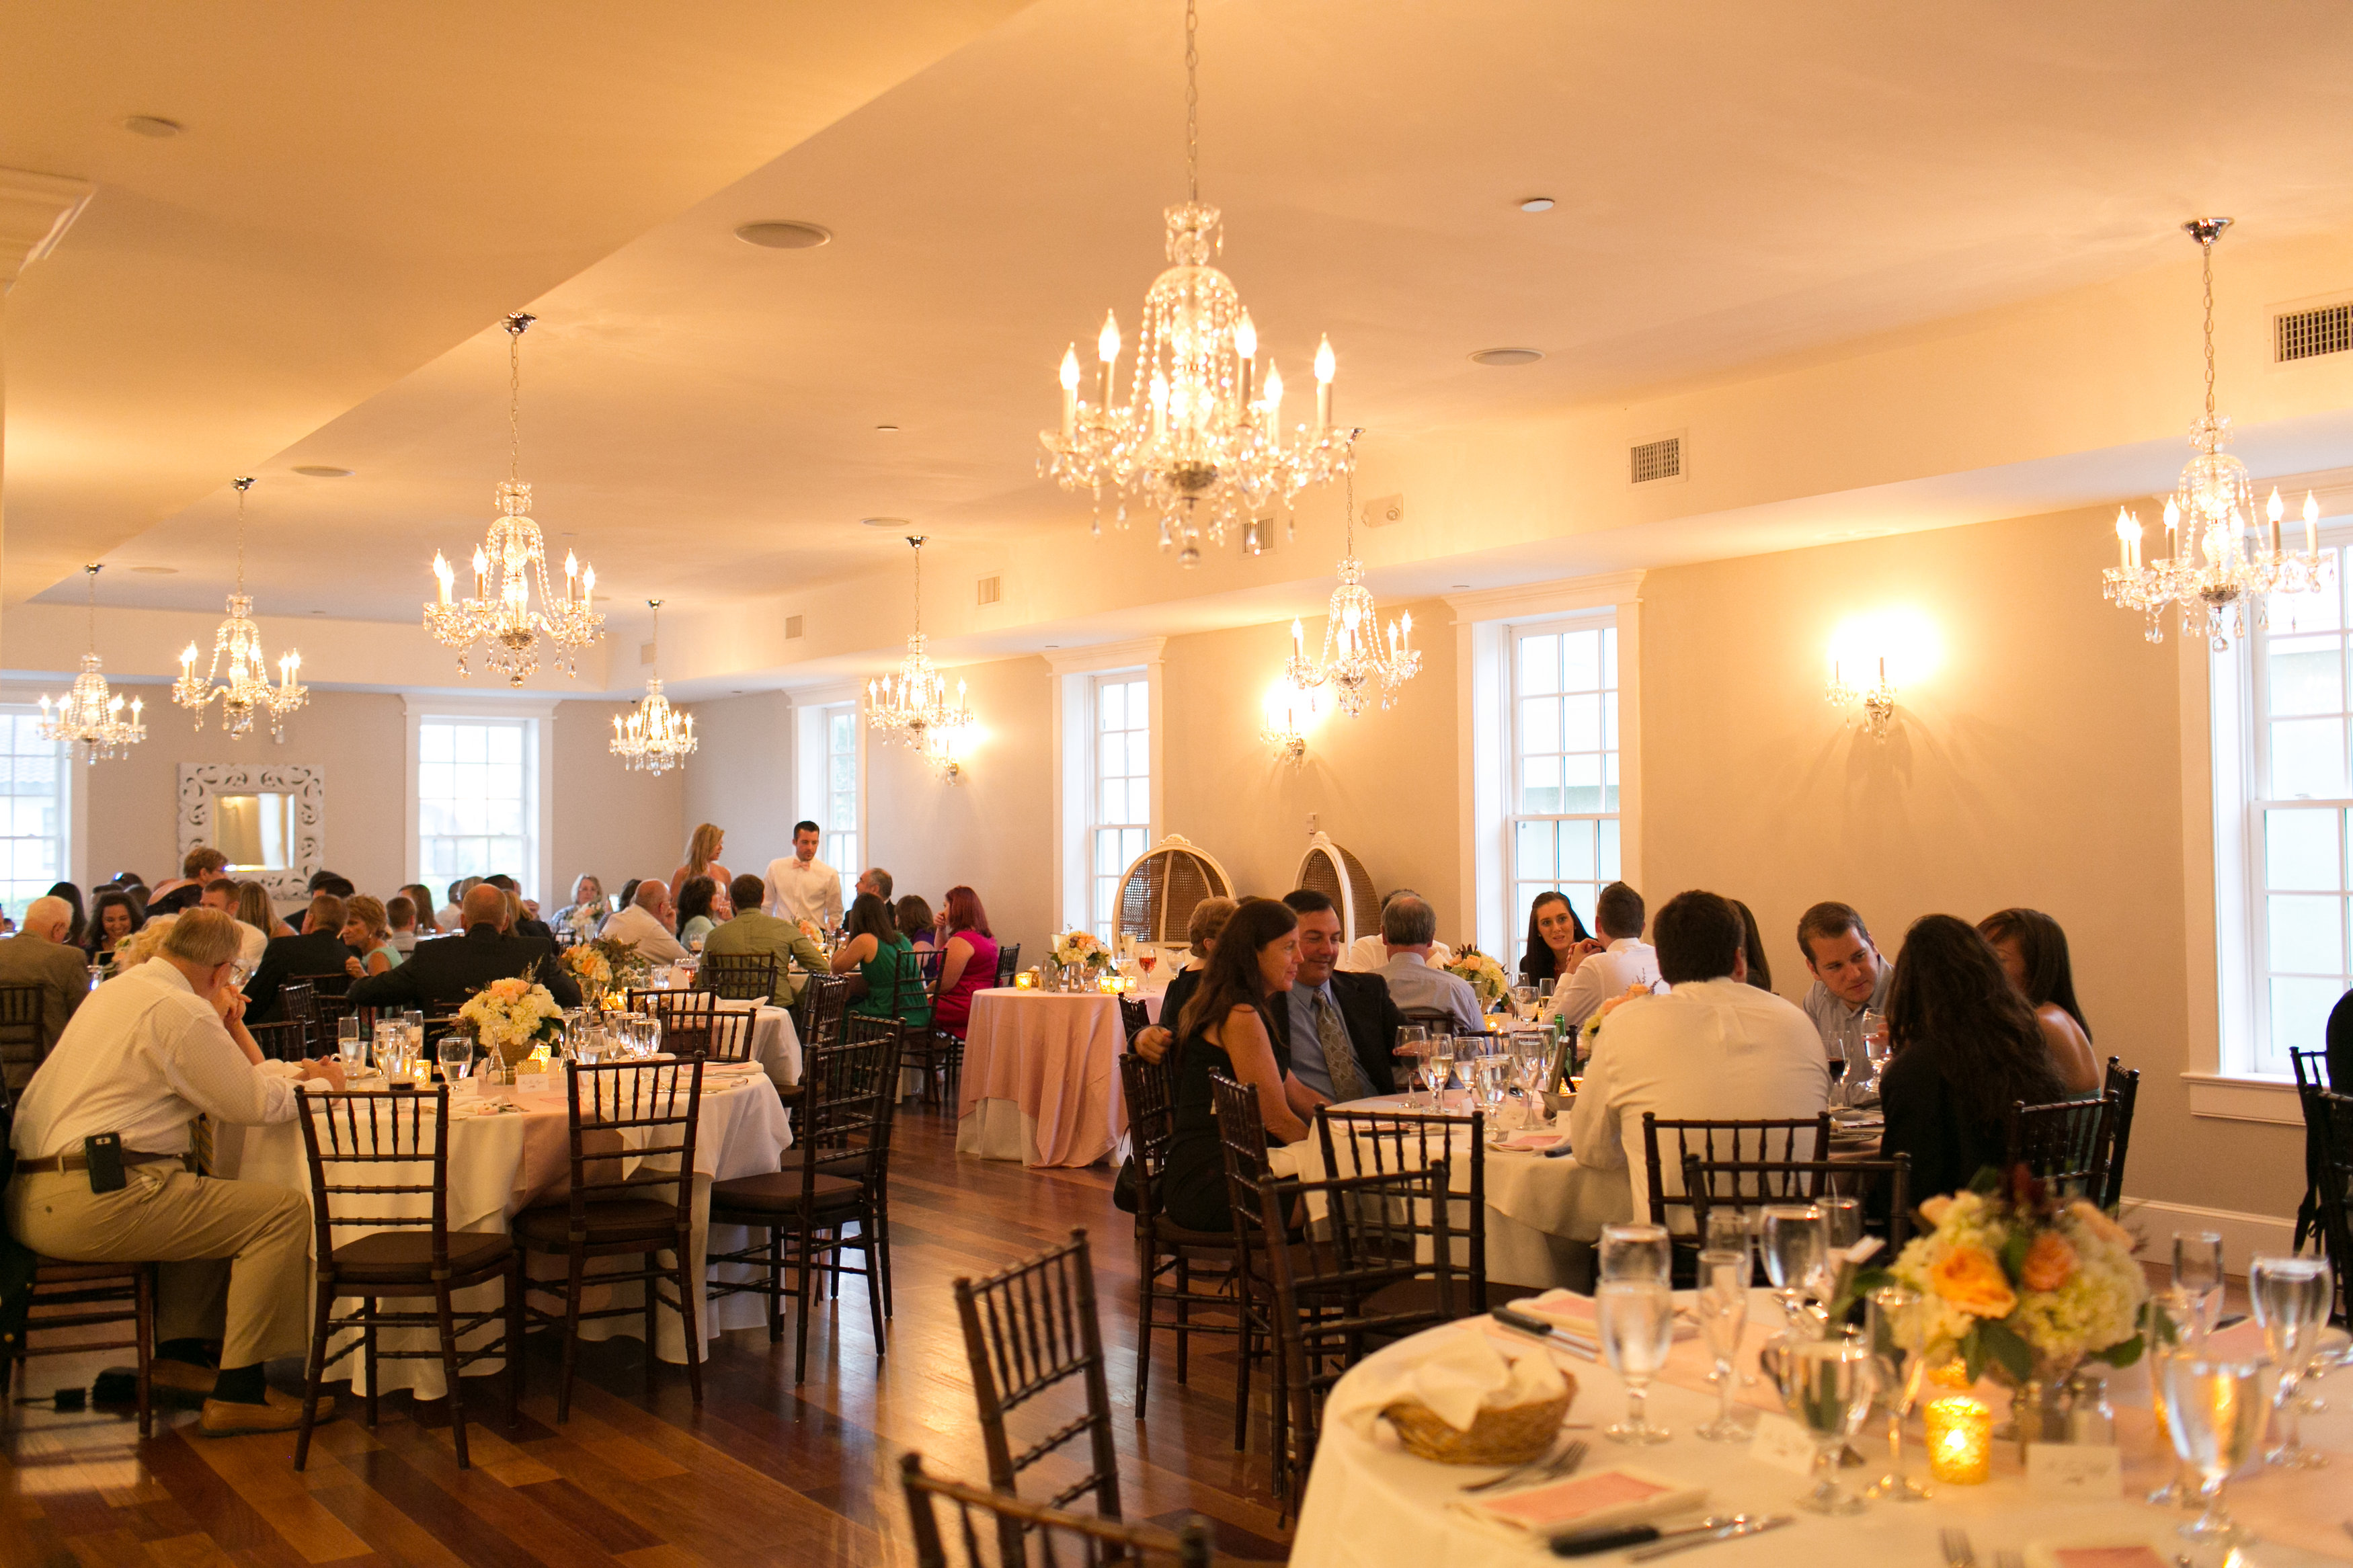 The White Room is an award winning full service private event and wedding venue located in the Heart of Historic Downtown St. Augustine